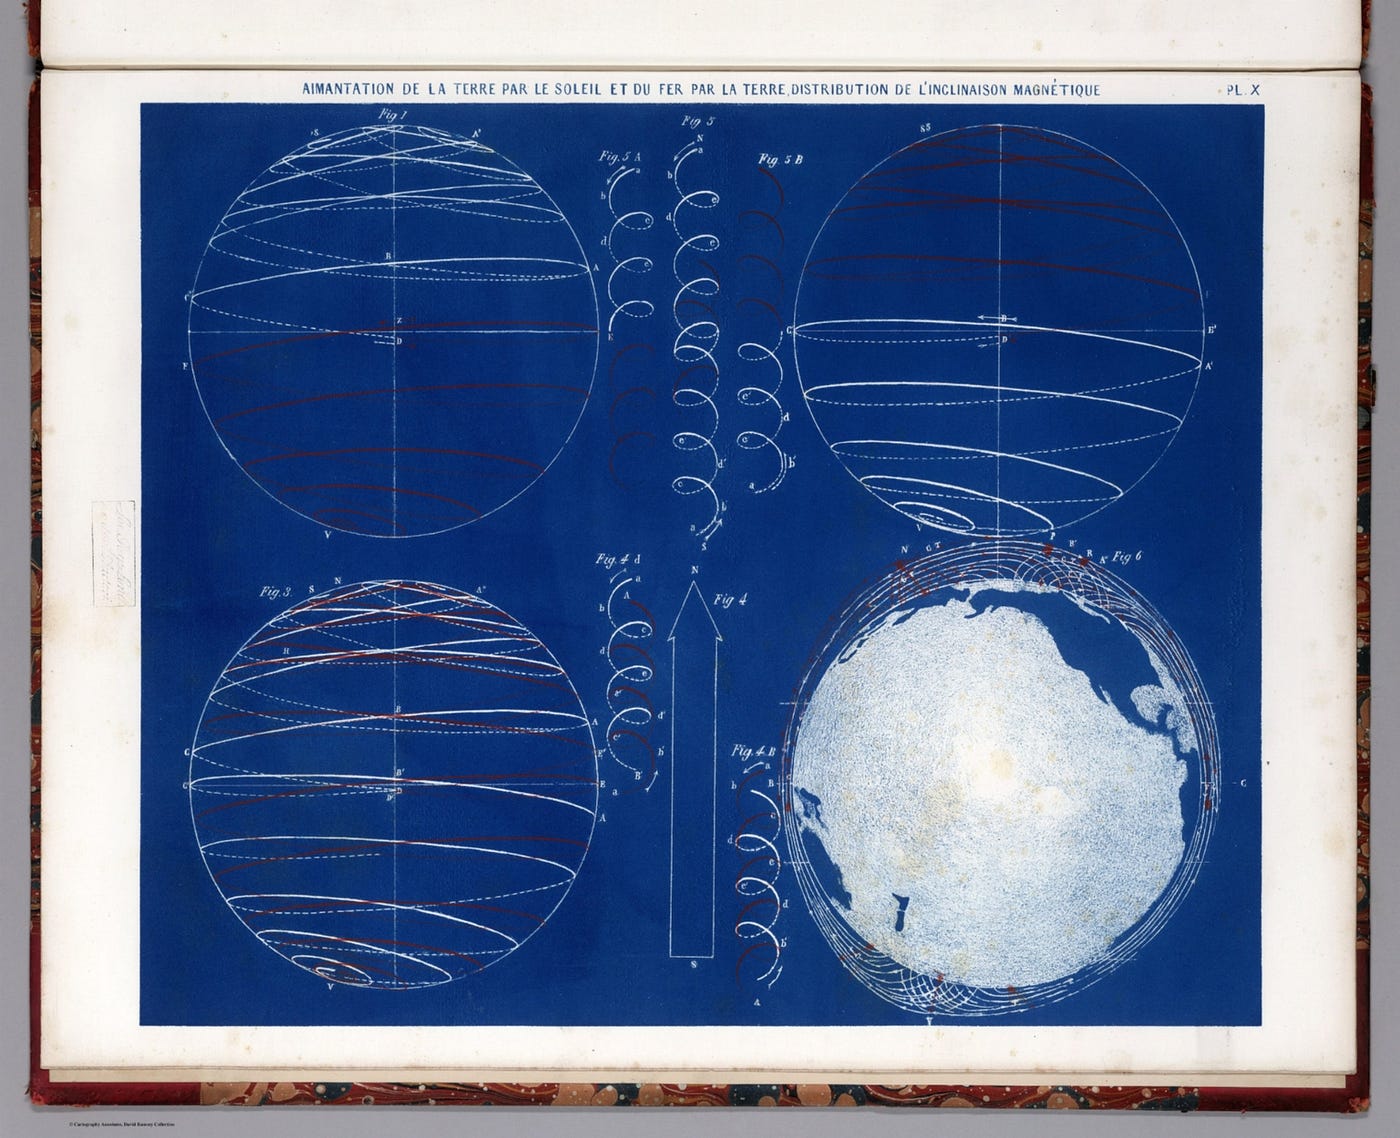 An image from Pierre Beron’s “Atlas Meteorologique”, showing four views of the earth and its magnetic field